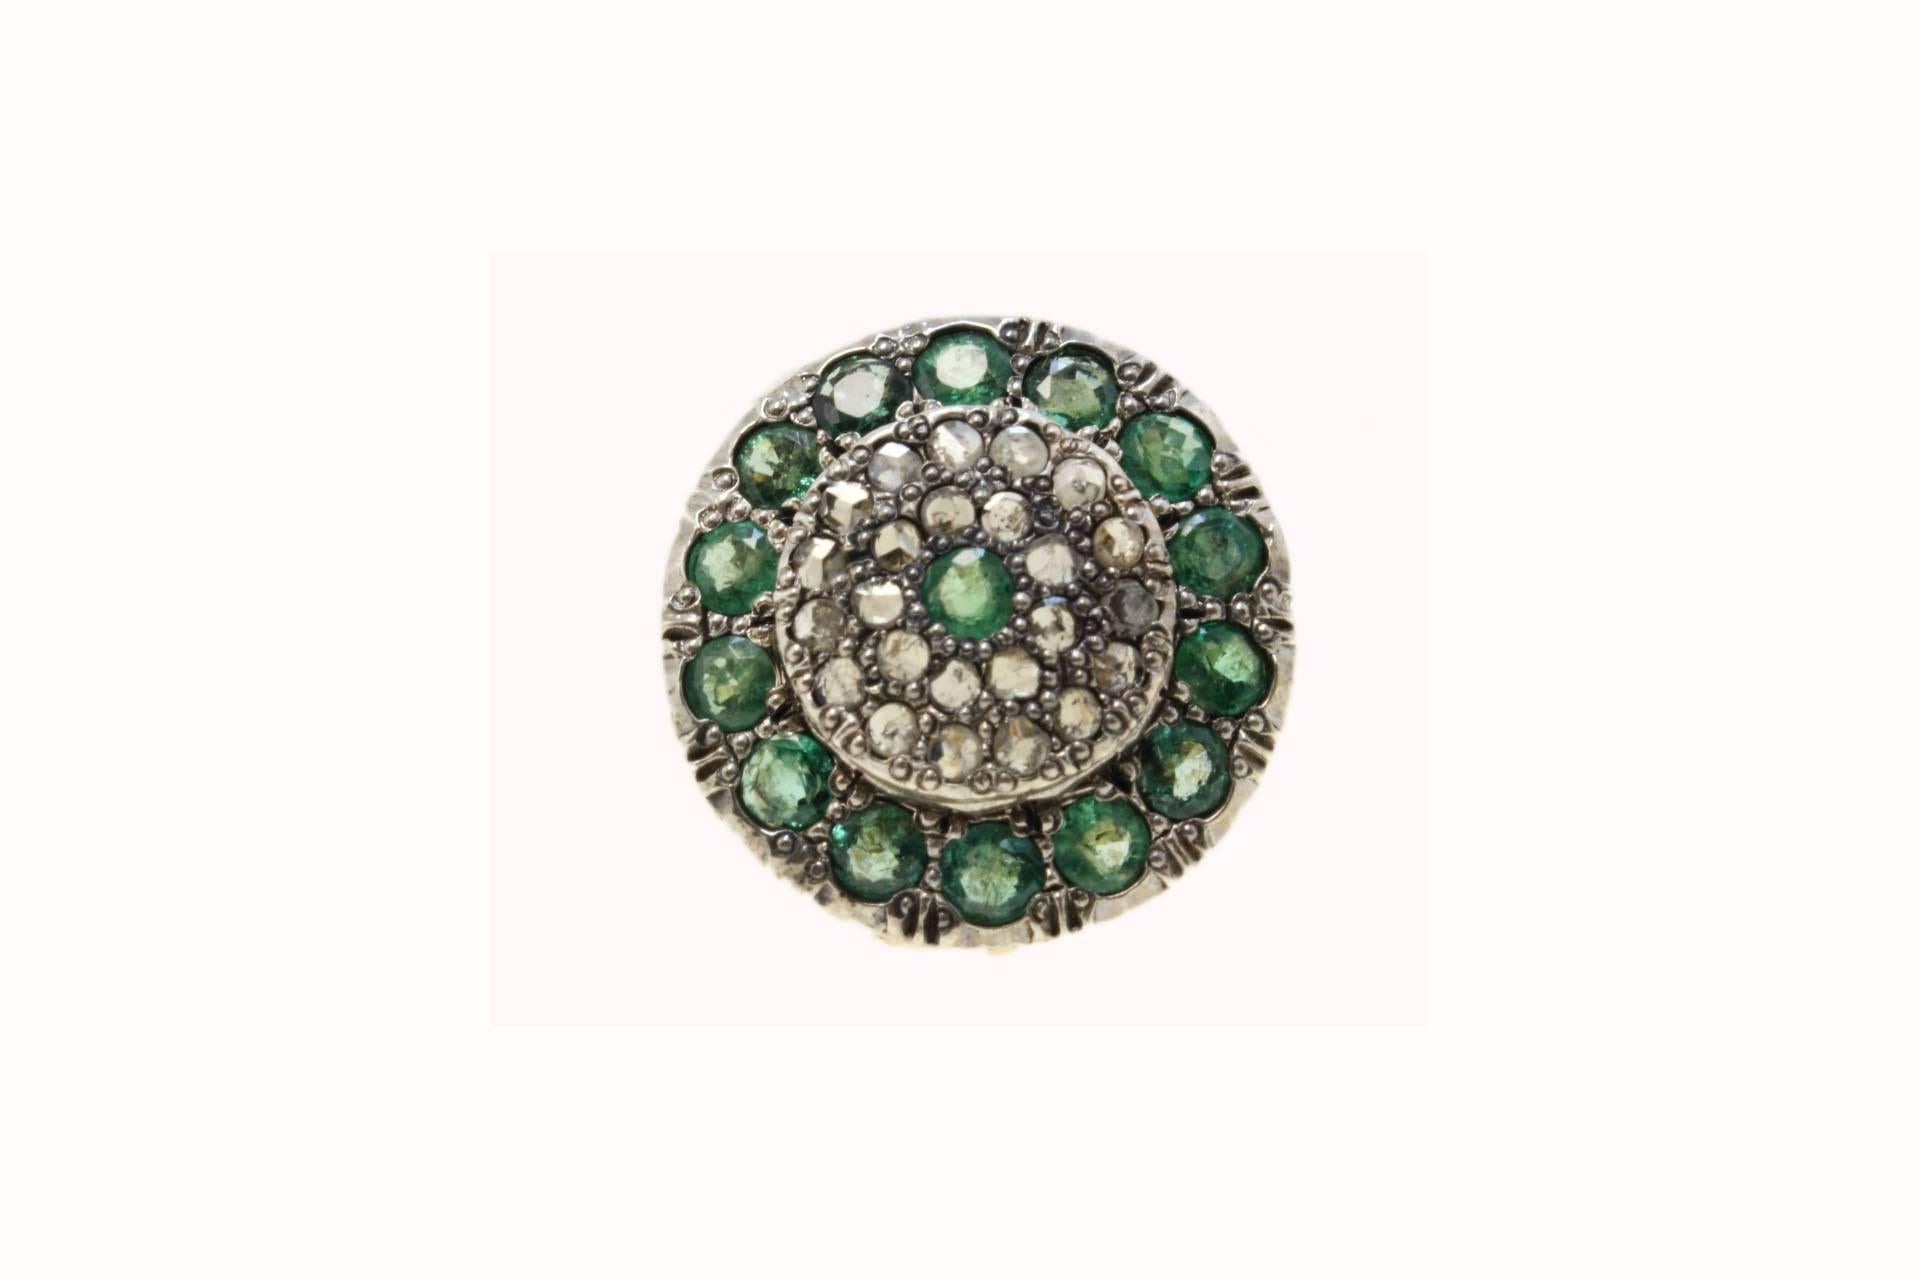 Classic late Victorian stud earrings, composed of a crown of emeralds that's surrounding a crown of diamonds. All is mounted in 9 Kt rose gold and silver.
Tot weight 12.72 g both earrings, 6.36 single one
Diamonds 0.91 ct
Emeralds 5.25 ct

Rf. ggho